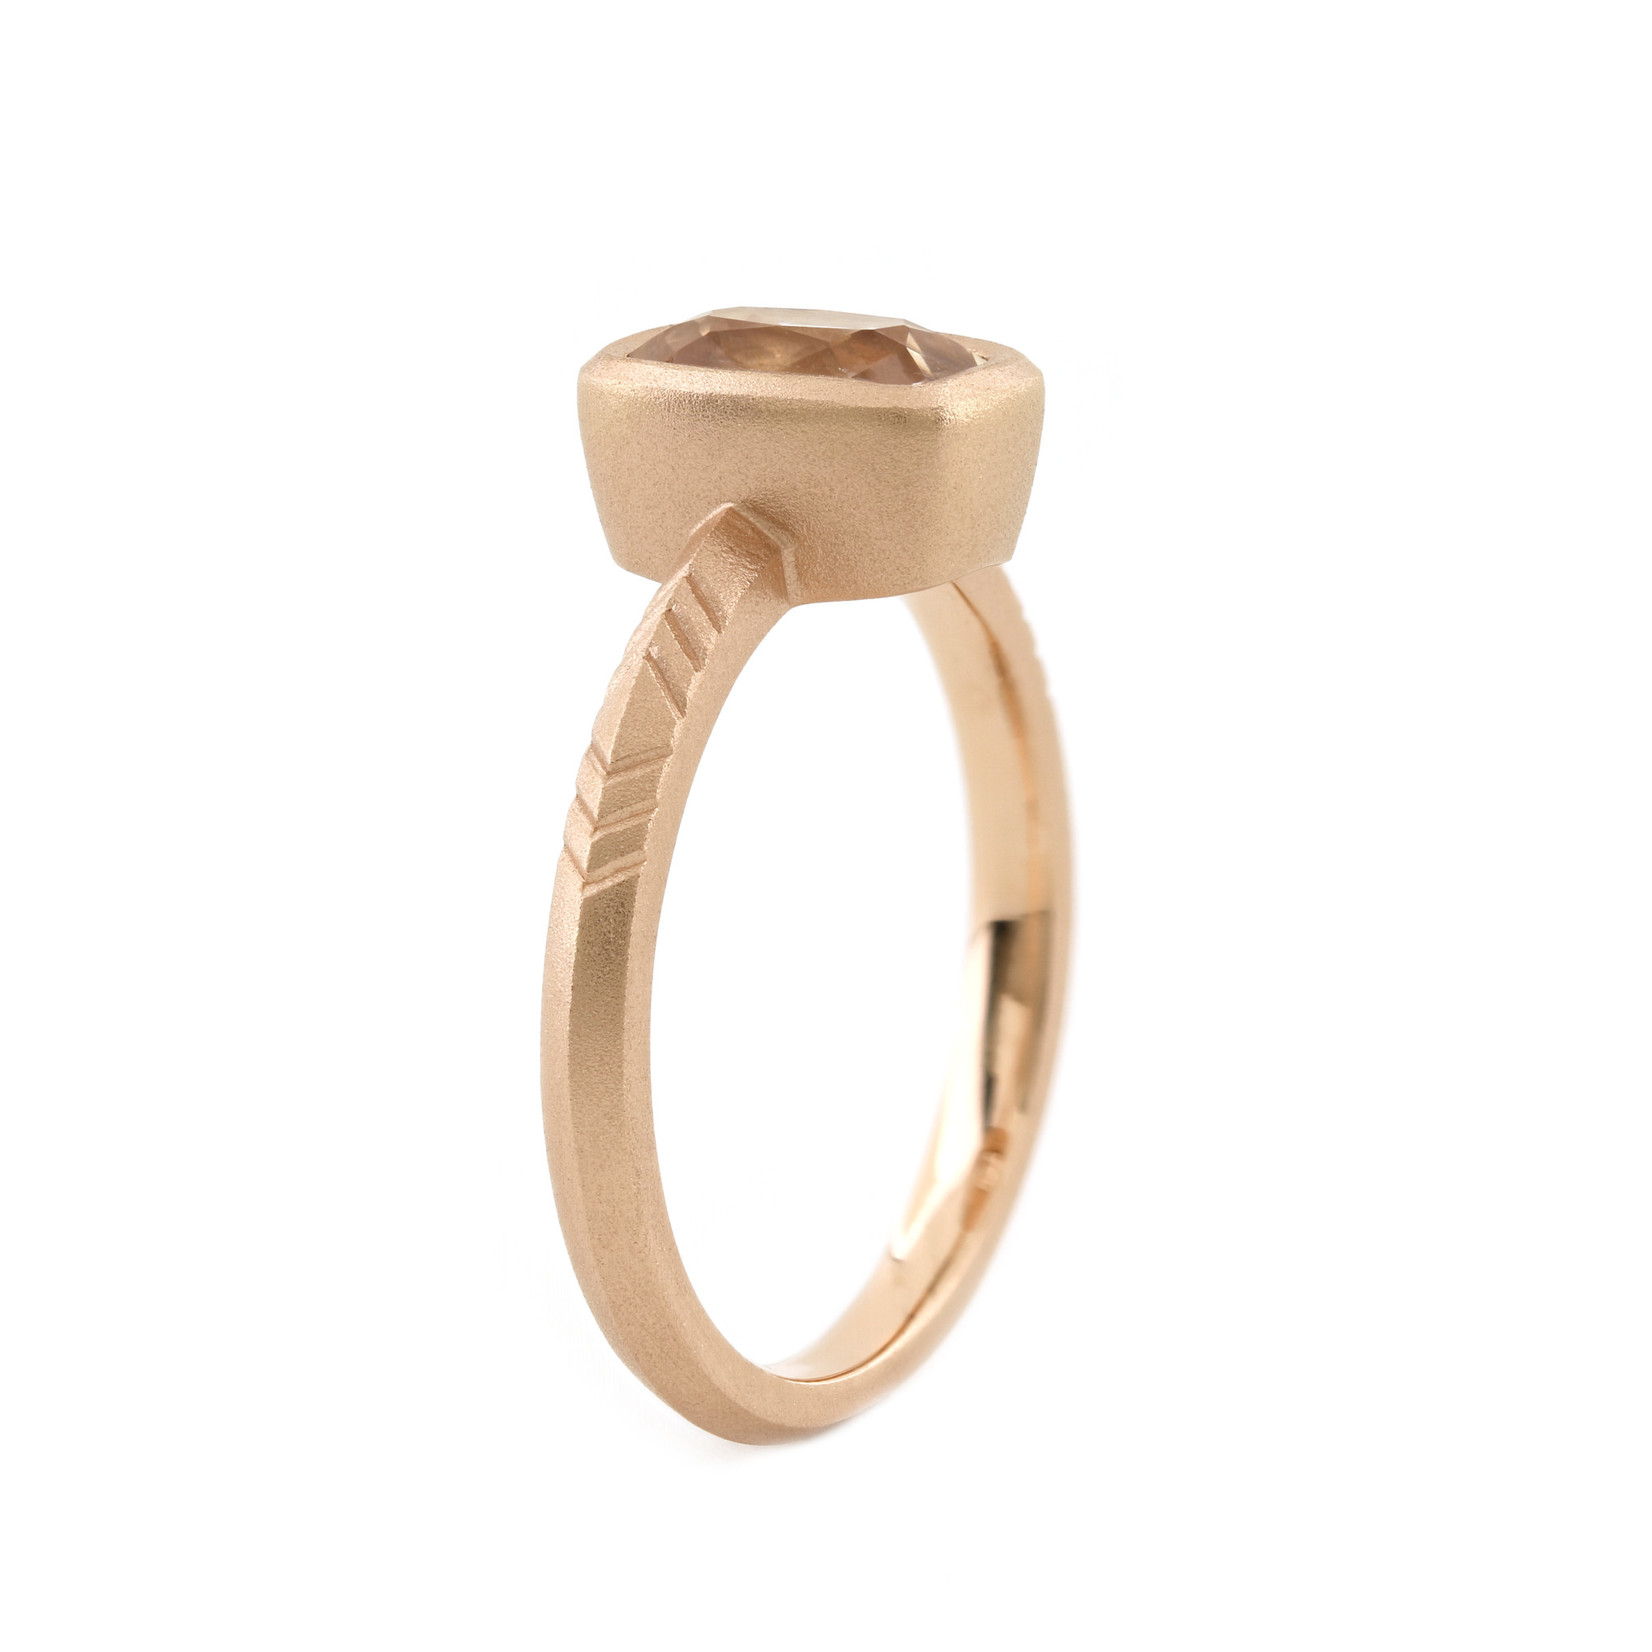 Baxter Moerman Shelby Ring with Peach Sapphire